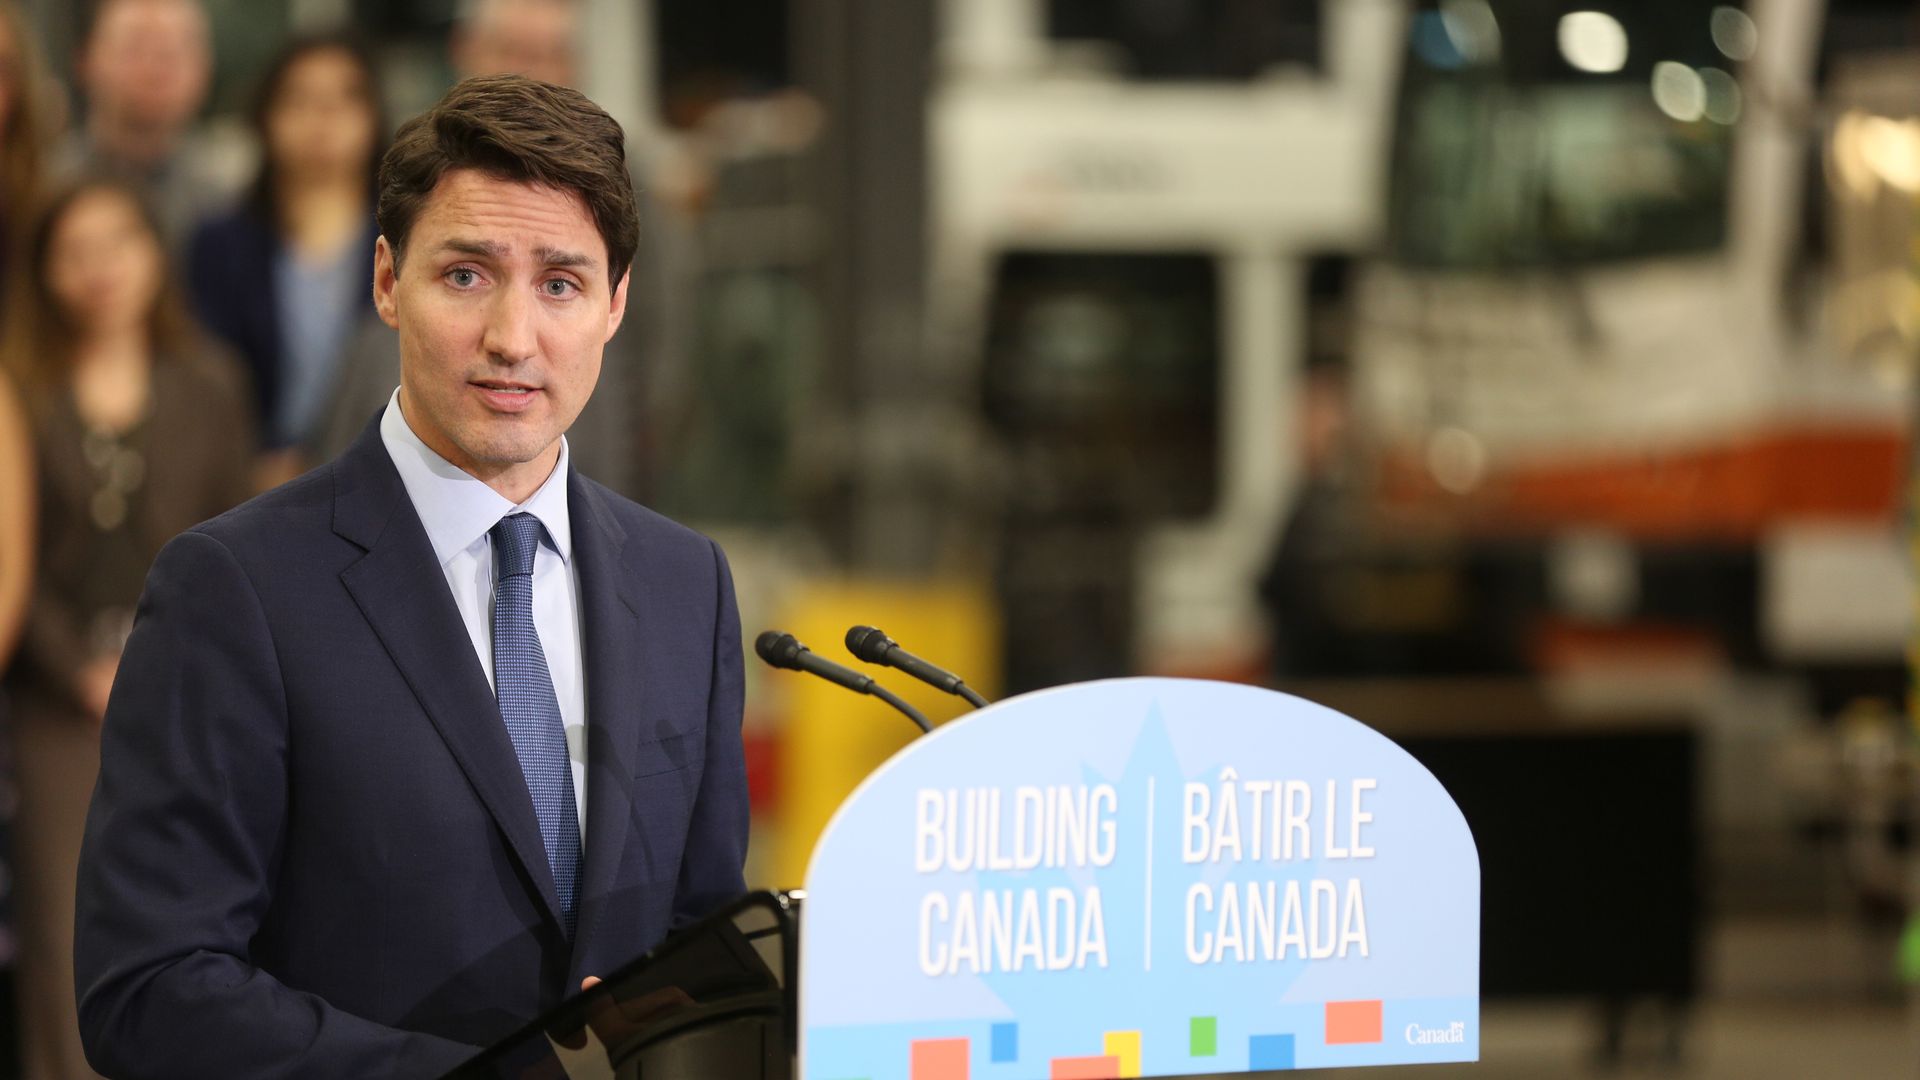 Canadian Prime Minister Justin Trudeau has expelled from party ranks 2 former Cabinet members he said had undermined the ruling Liberals.